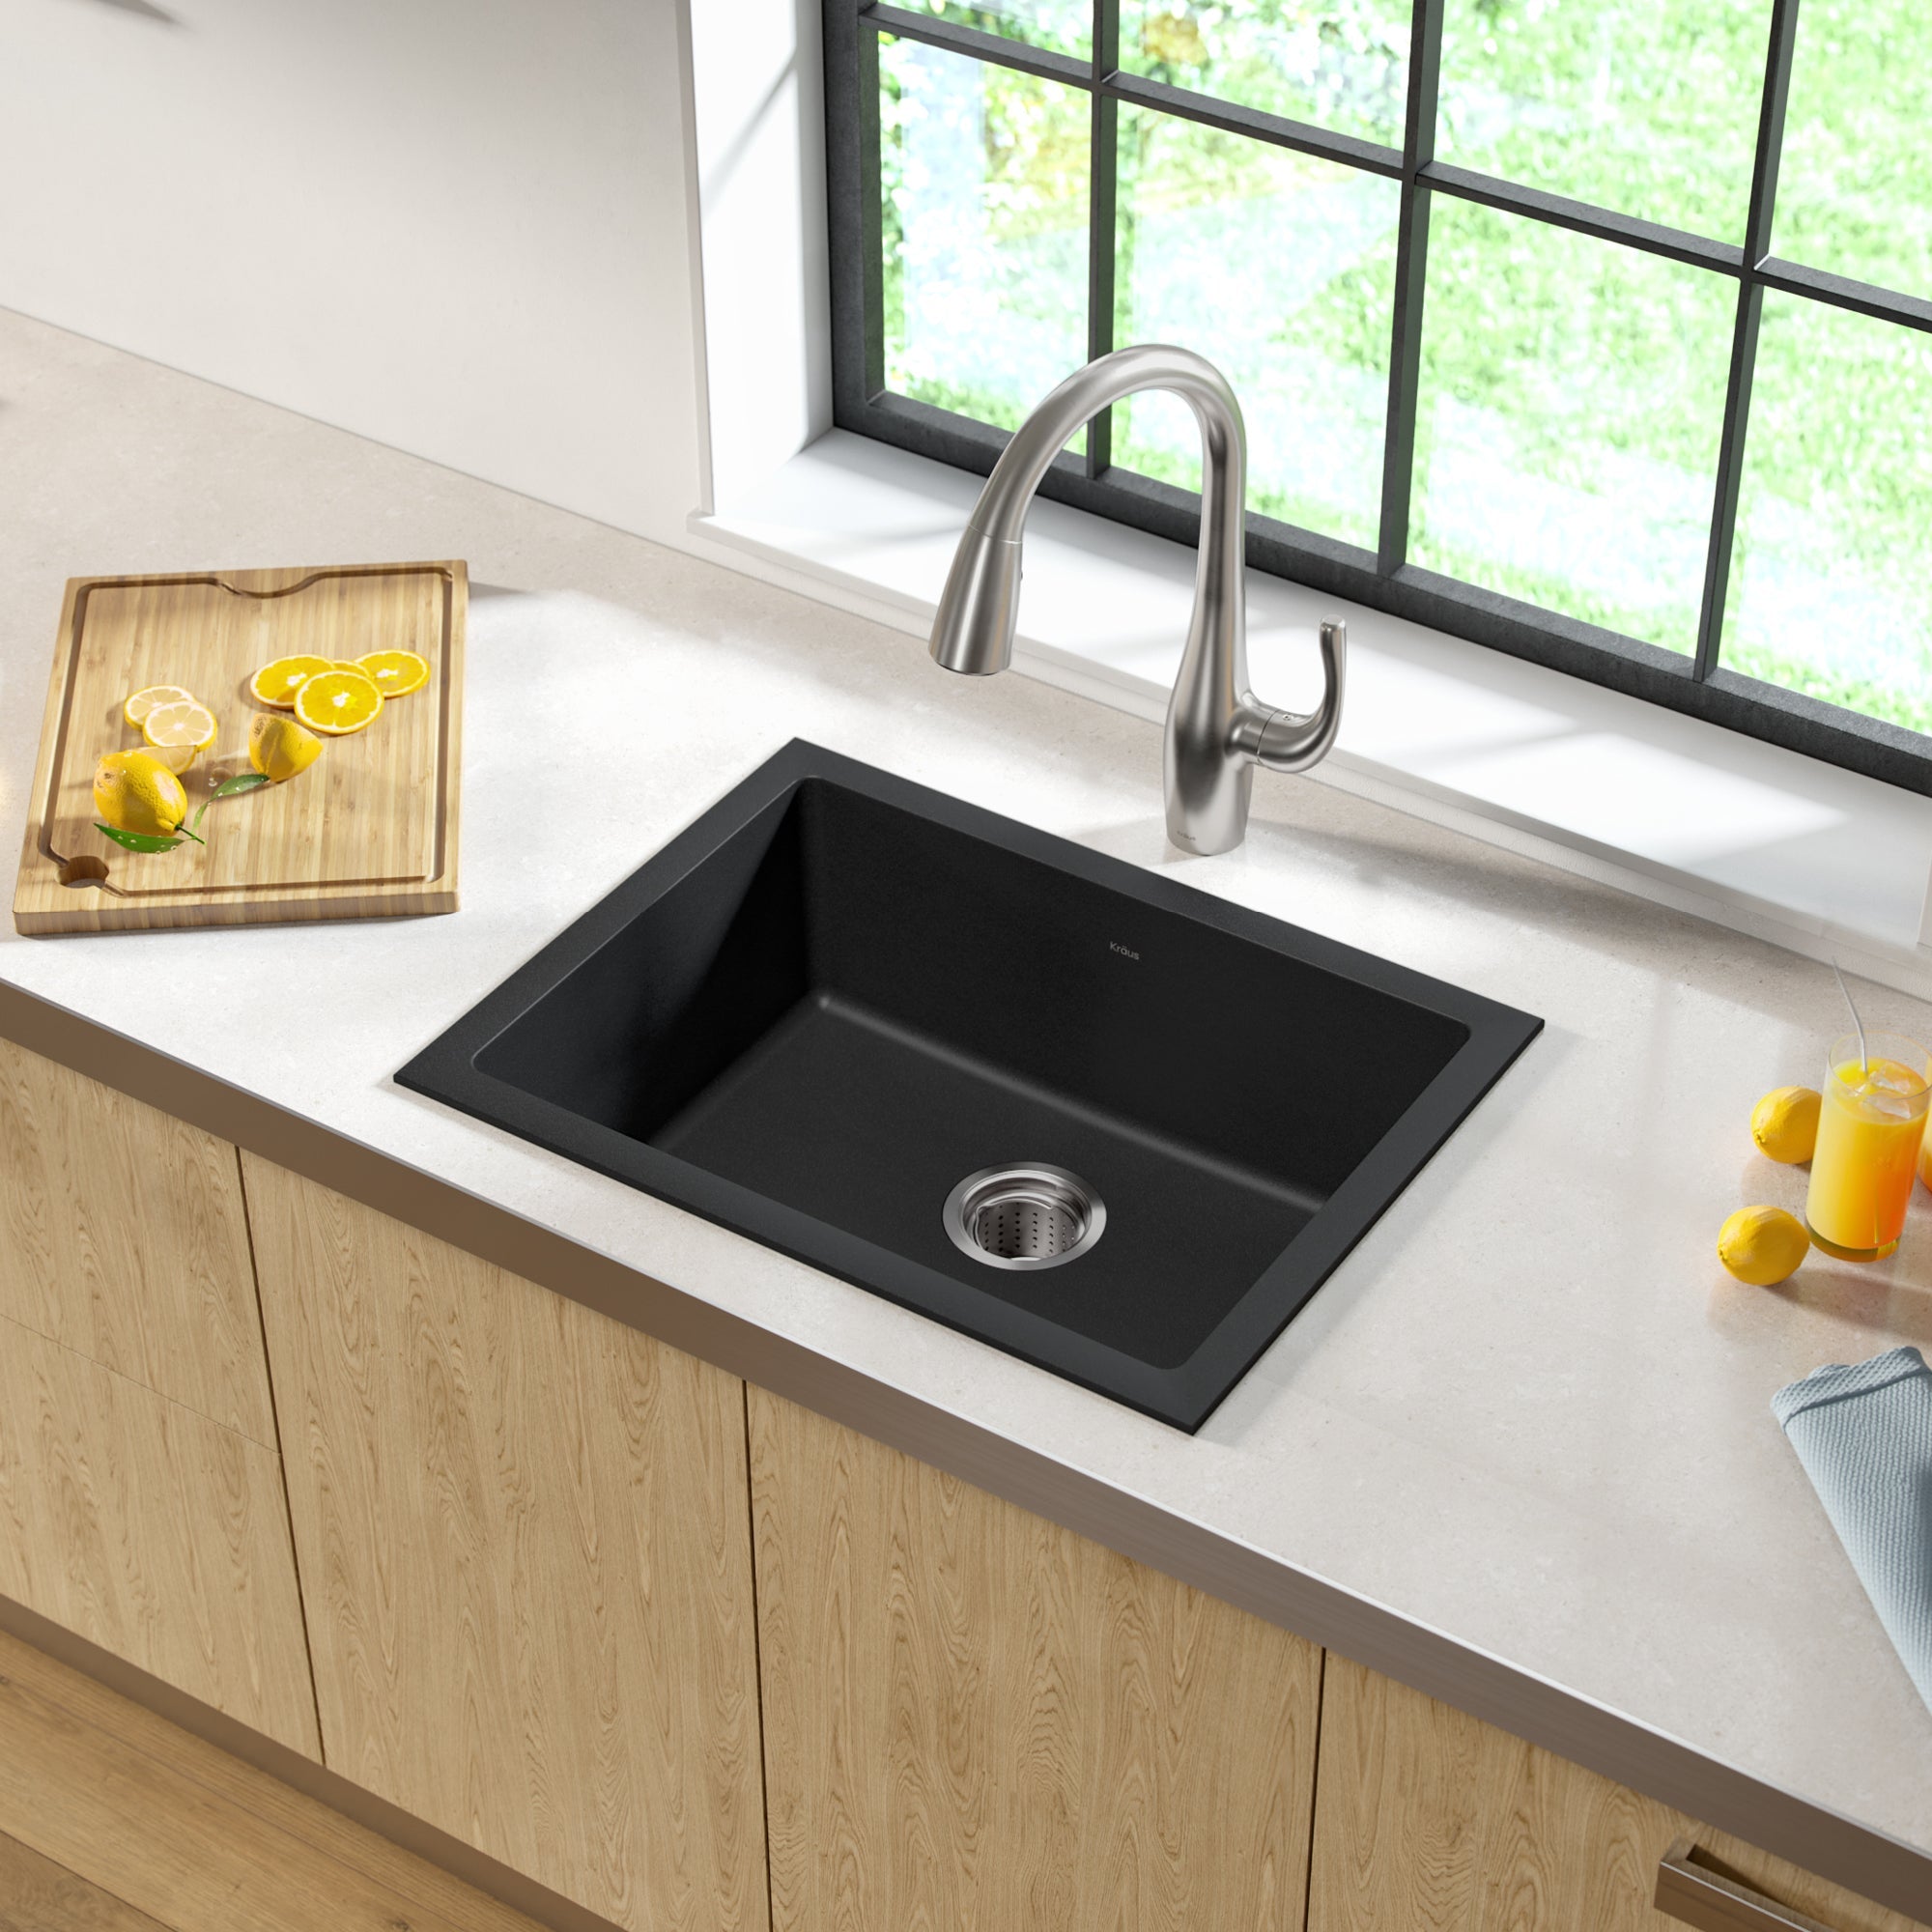 How Do You Install a Granite Kitchen Sink?